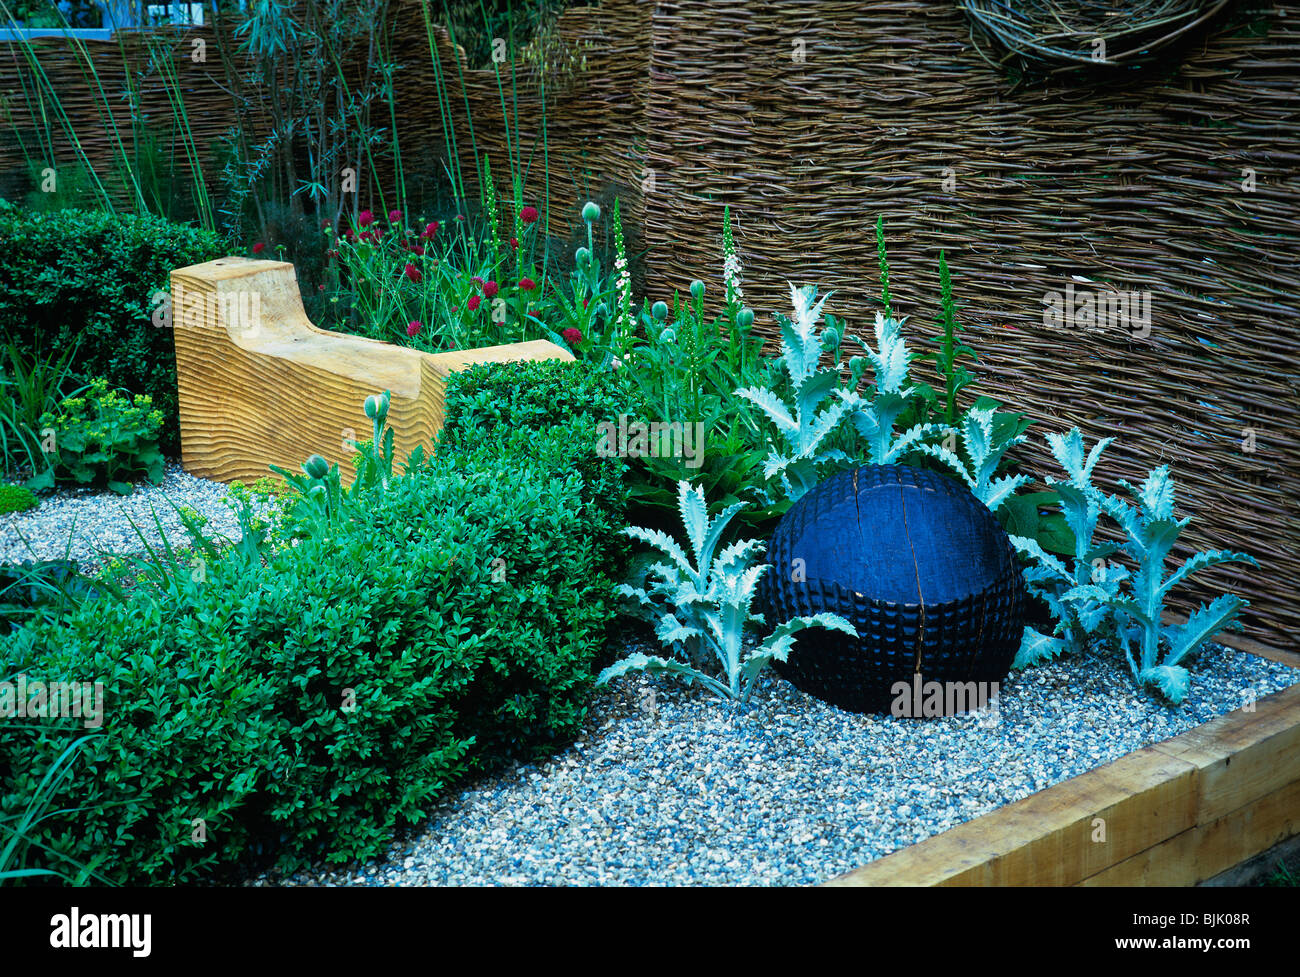 A corner of a small urban garden with decorative carved wooden seat and ball Stock Photo